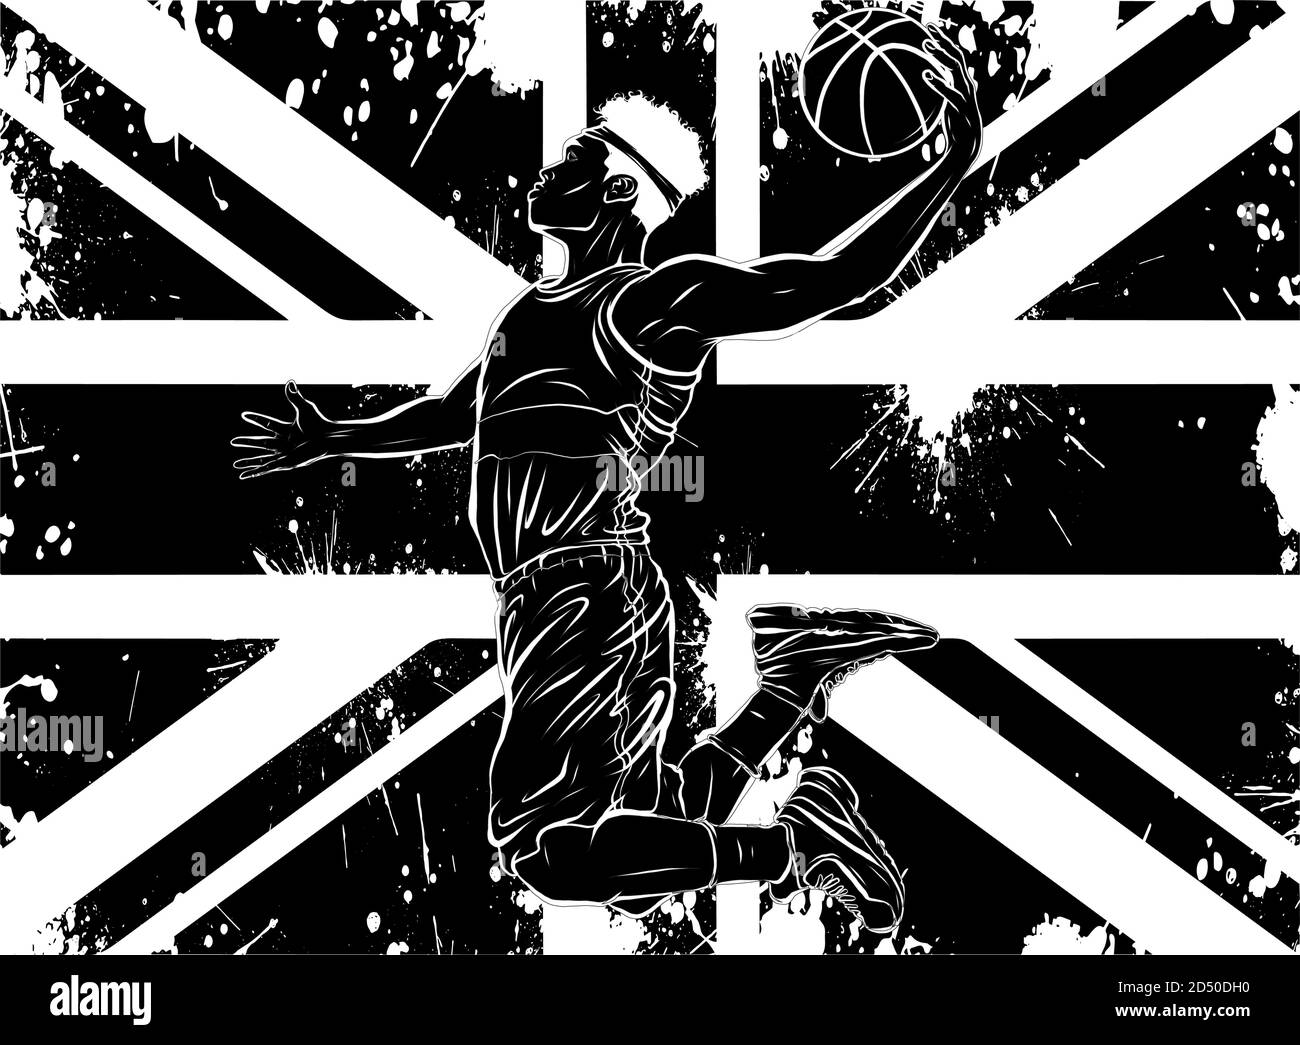 black silhouette basketball and country flags vector illustration art Stock Vector